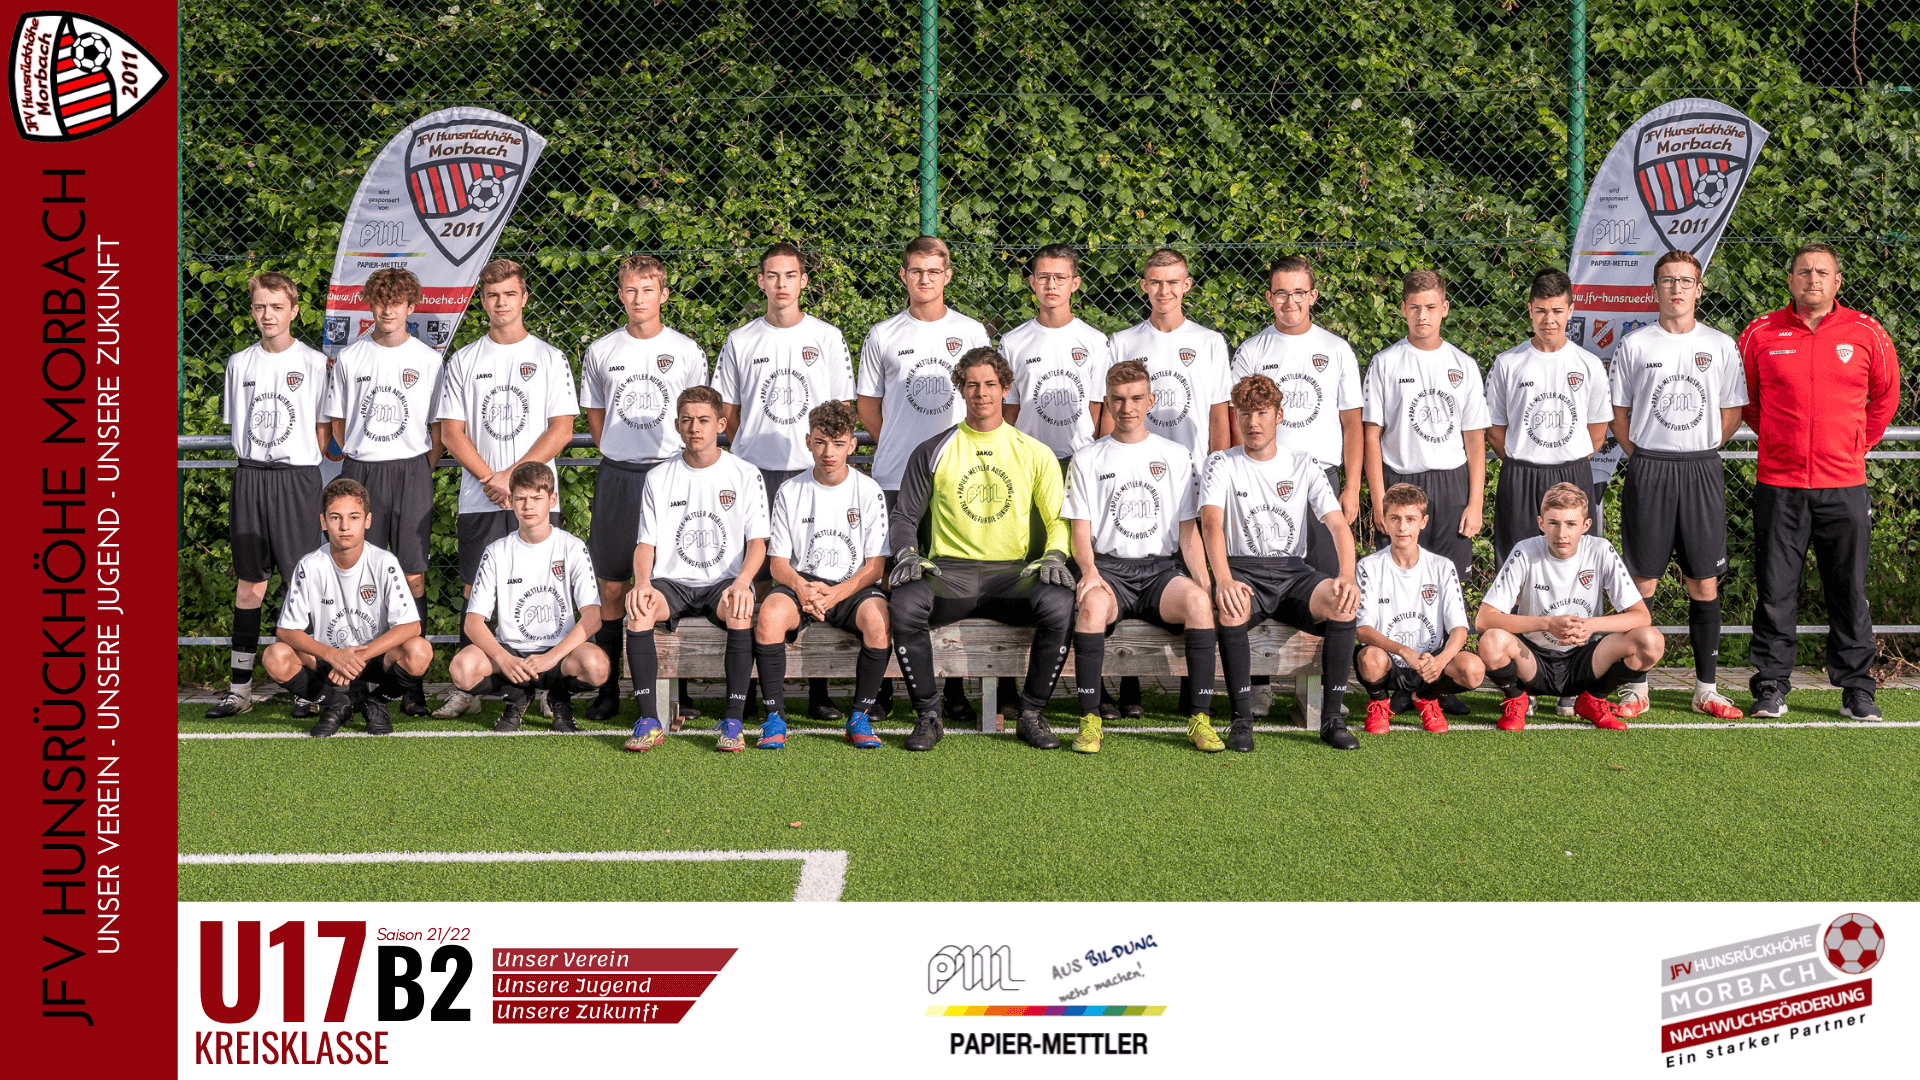 You are currently viewing U17 B2 Abschlussbericht Saison 21/22